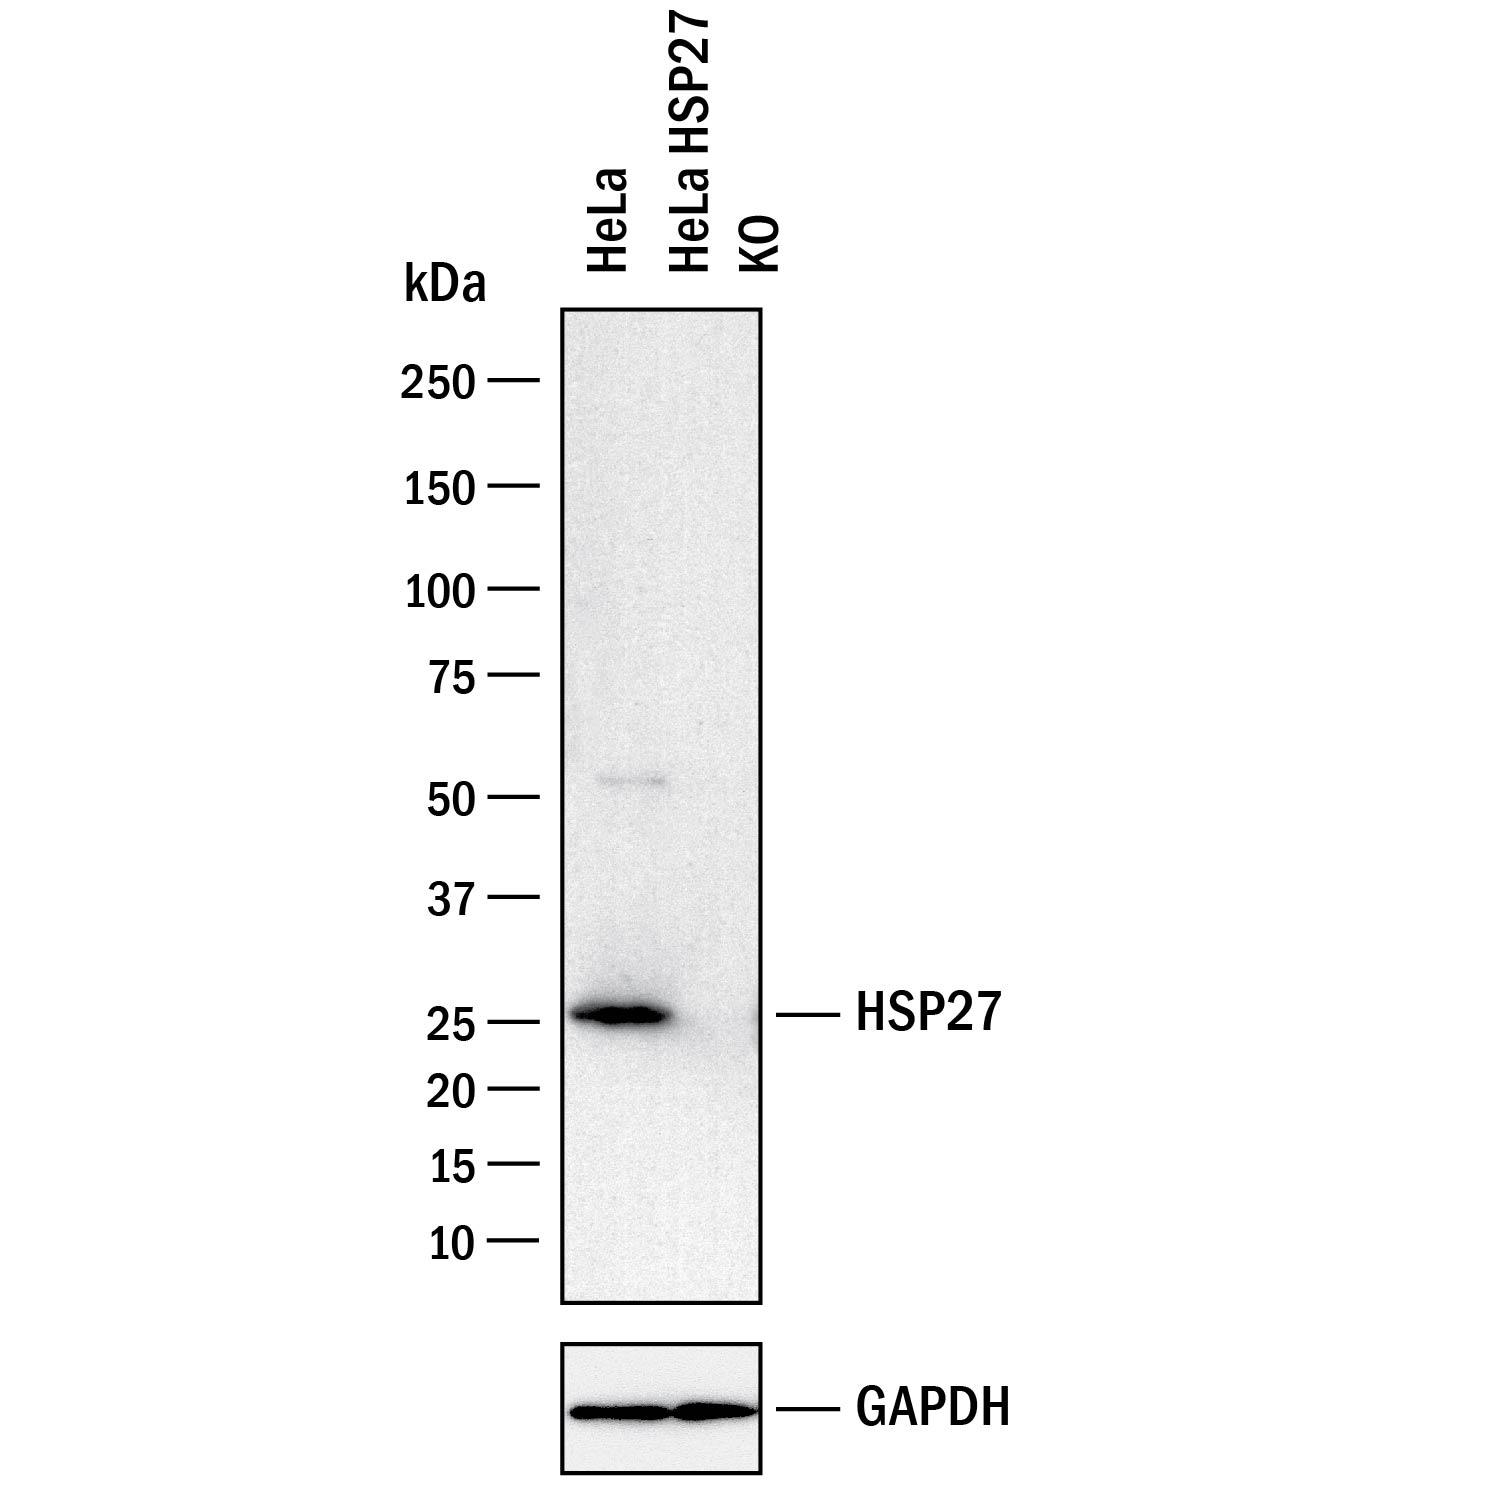 Western Blot Shows Human HSP27 Antibody Specificity by Using Knockout Cell Line.